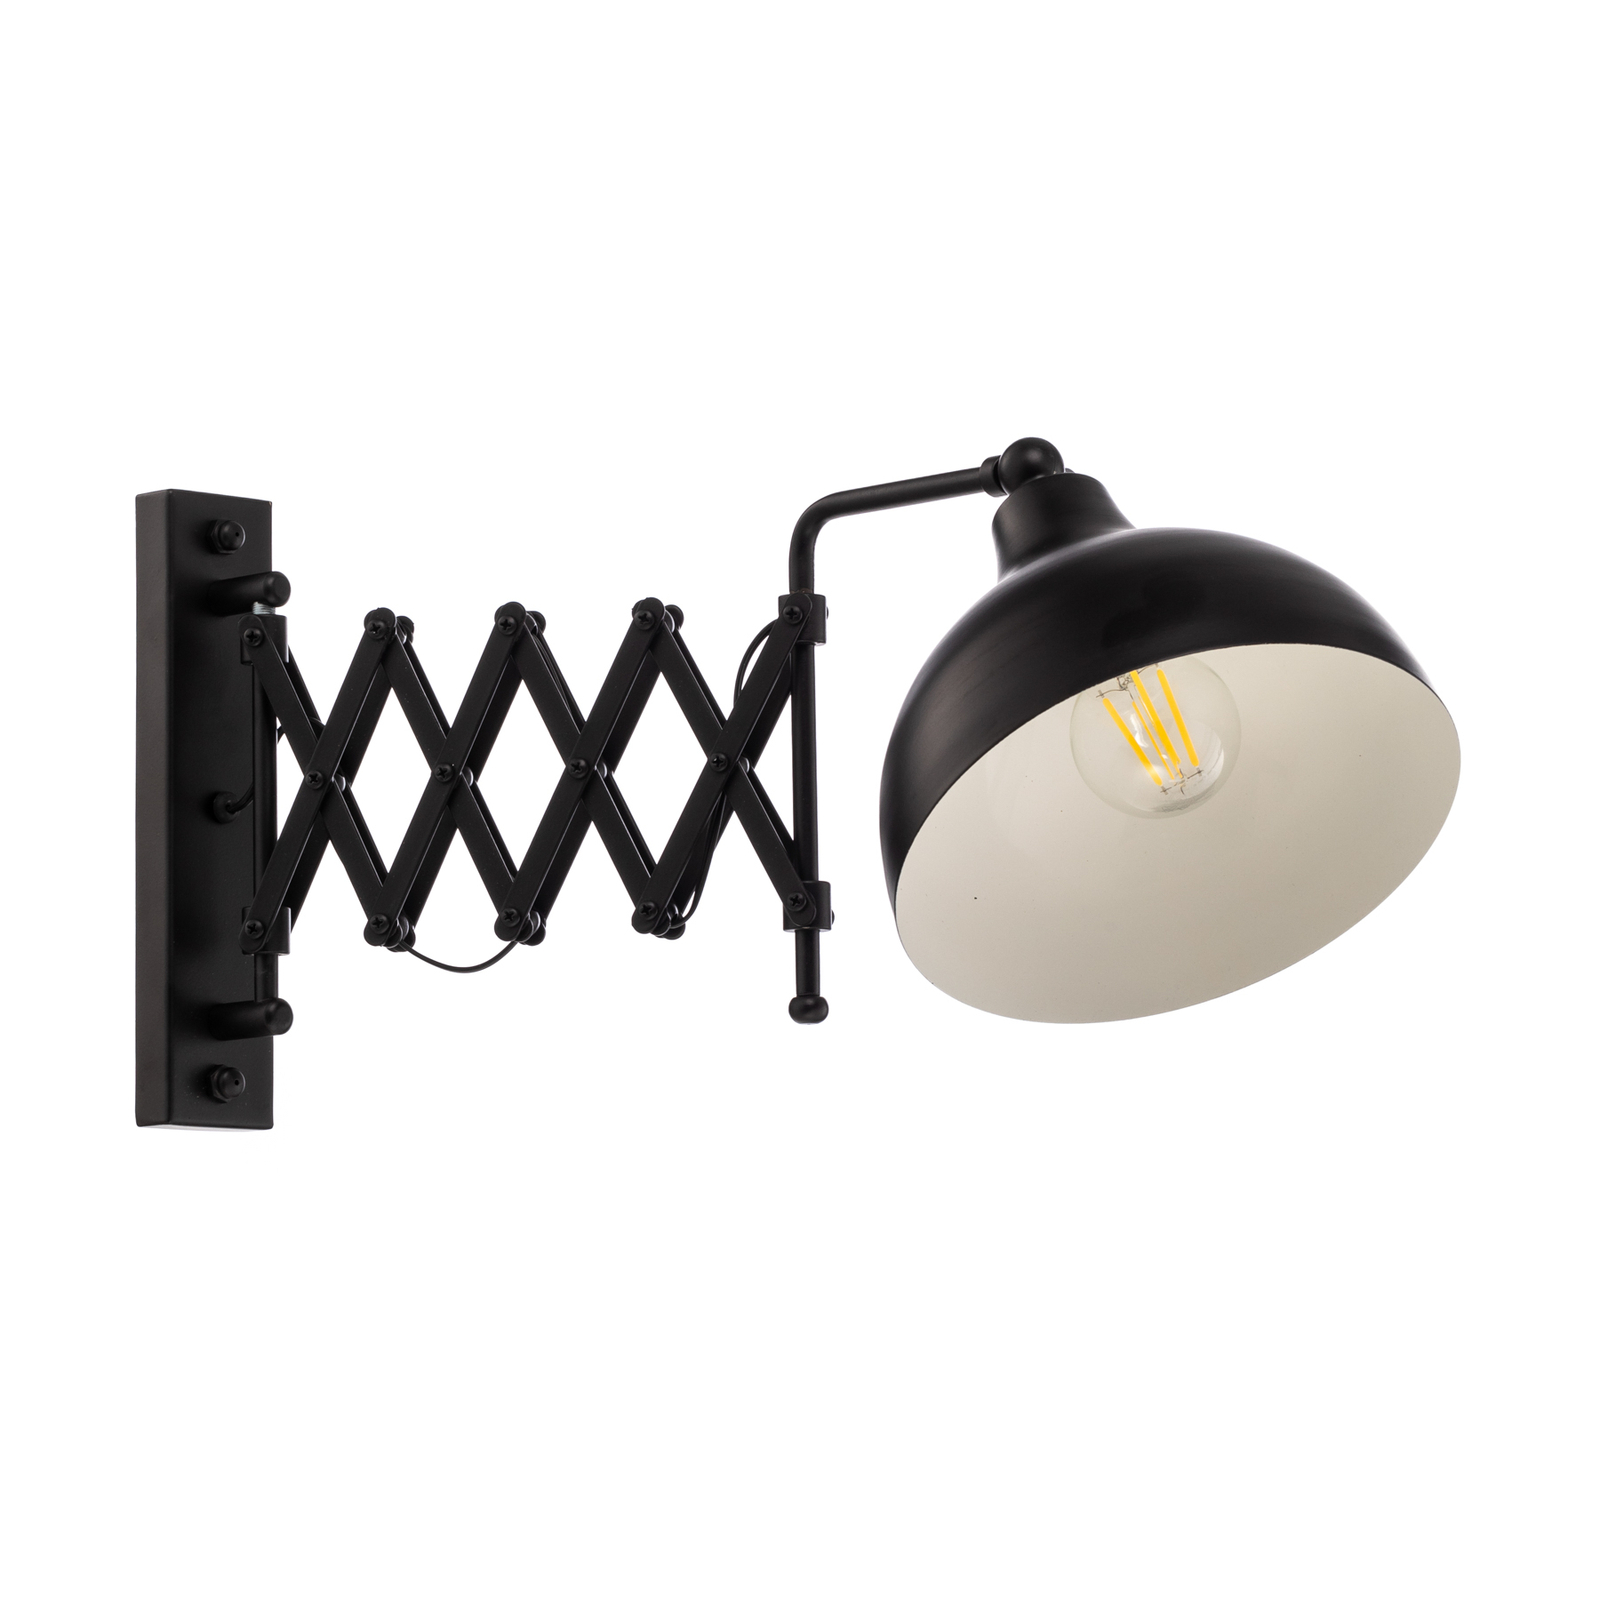 HAP-9082-CPR wall light with a scissors arm, black